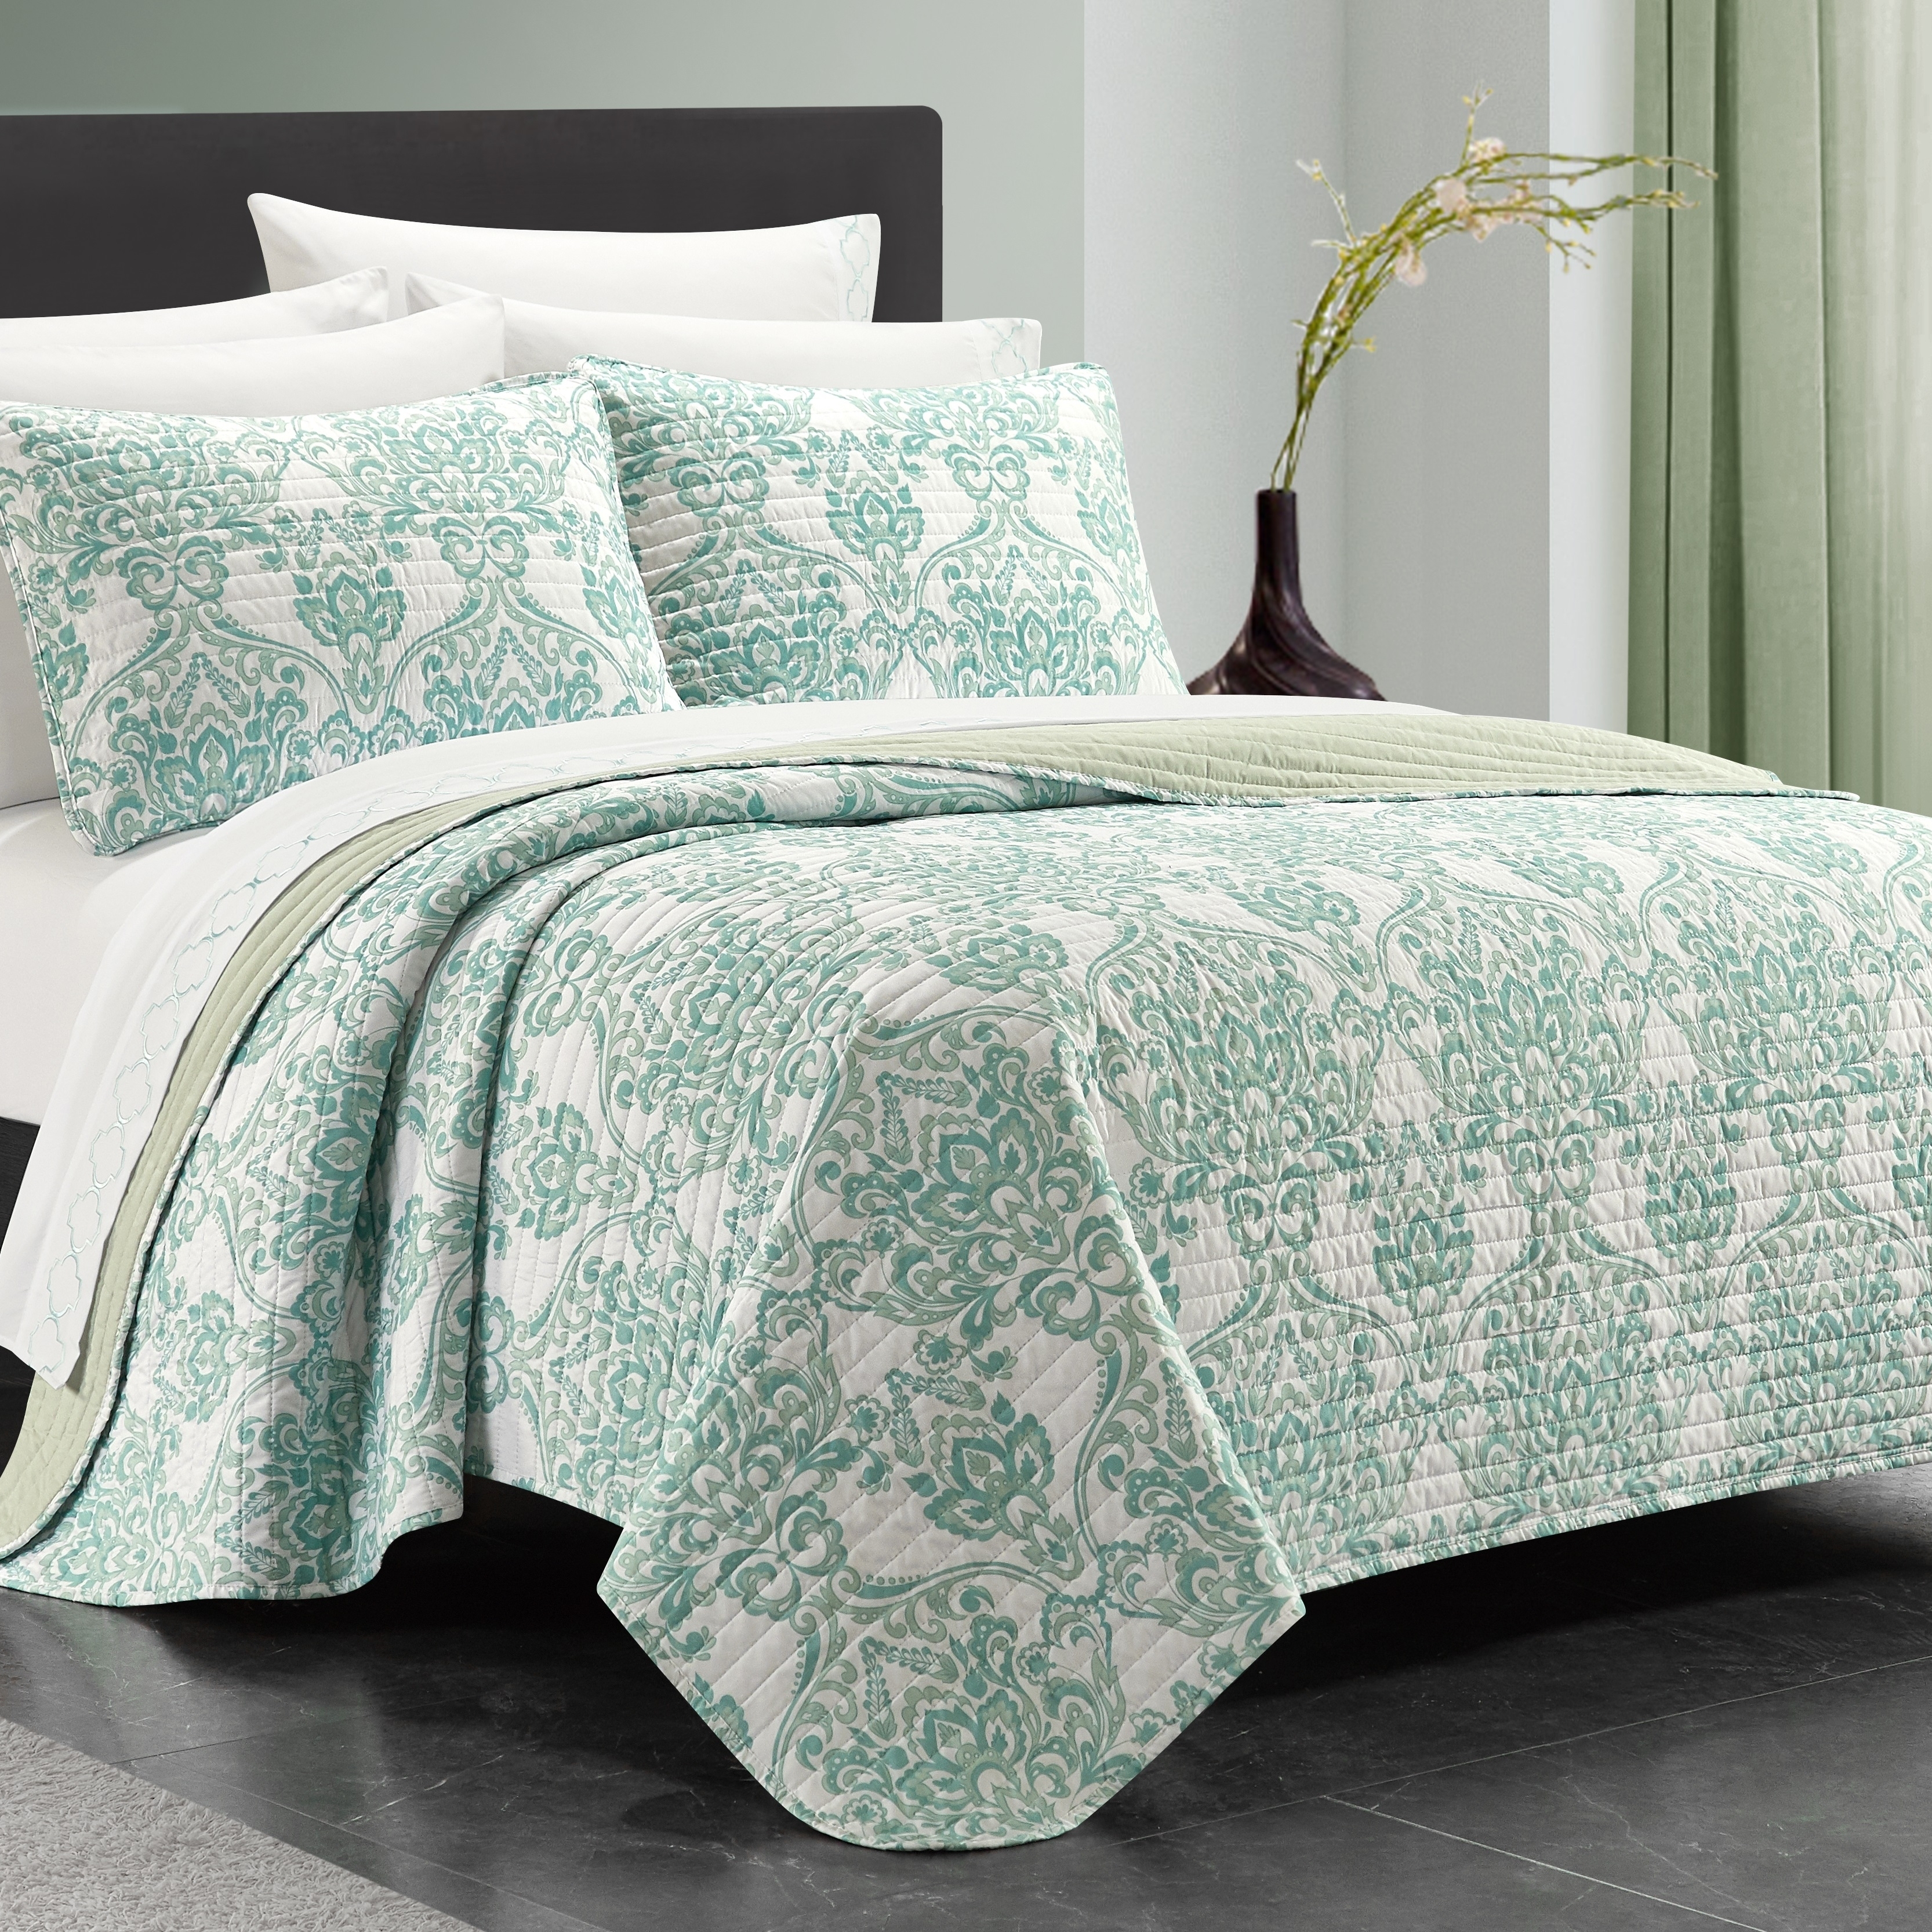 9 Or 6 Piece Quilt Set Medallion Or Floral Pattern Print Reversible Bed In A Bag - Sage Green, Full